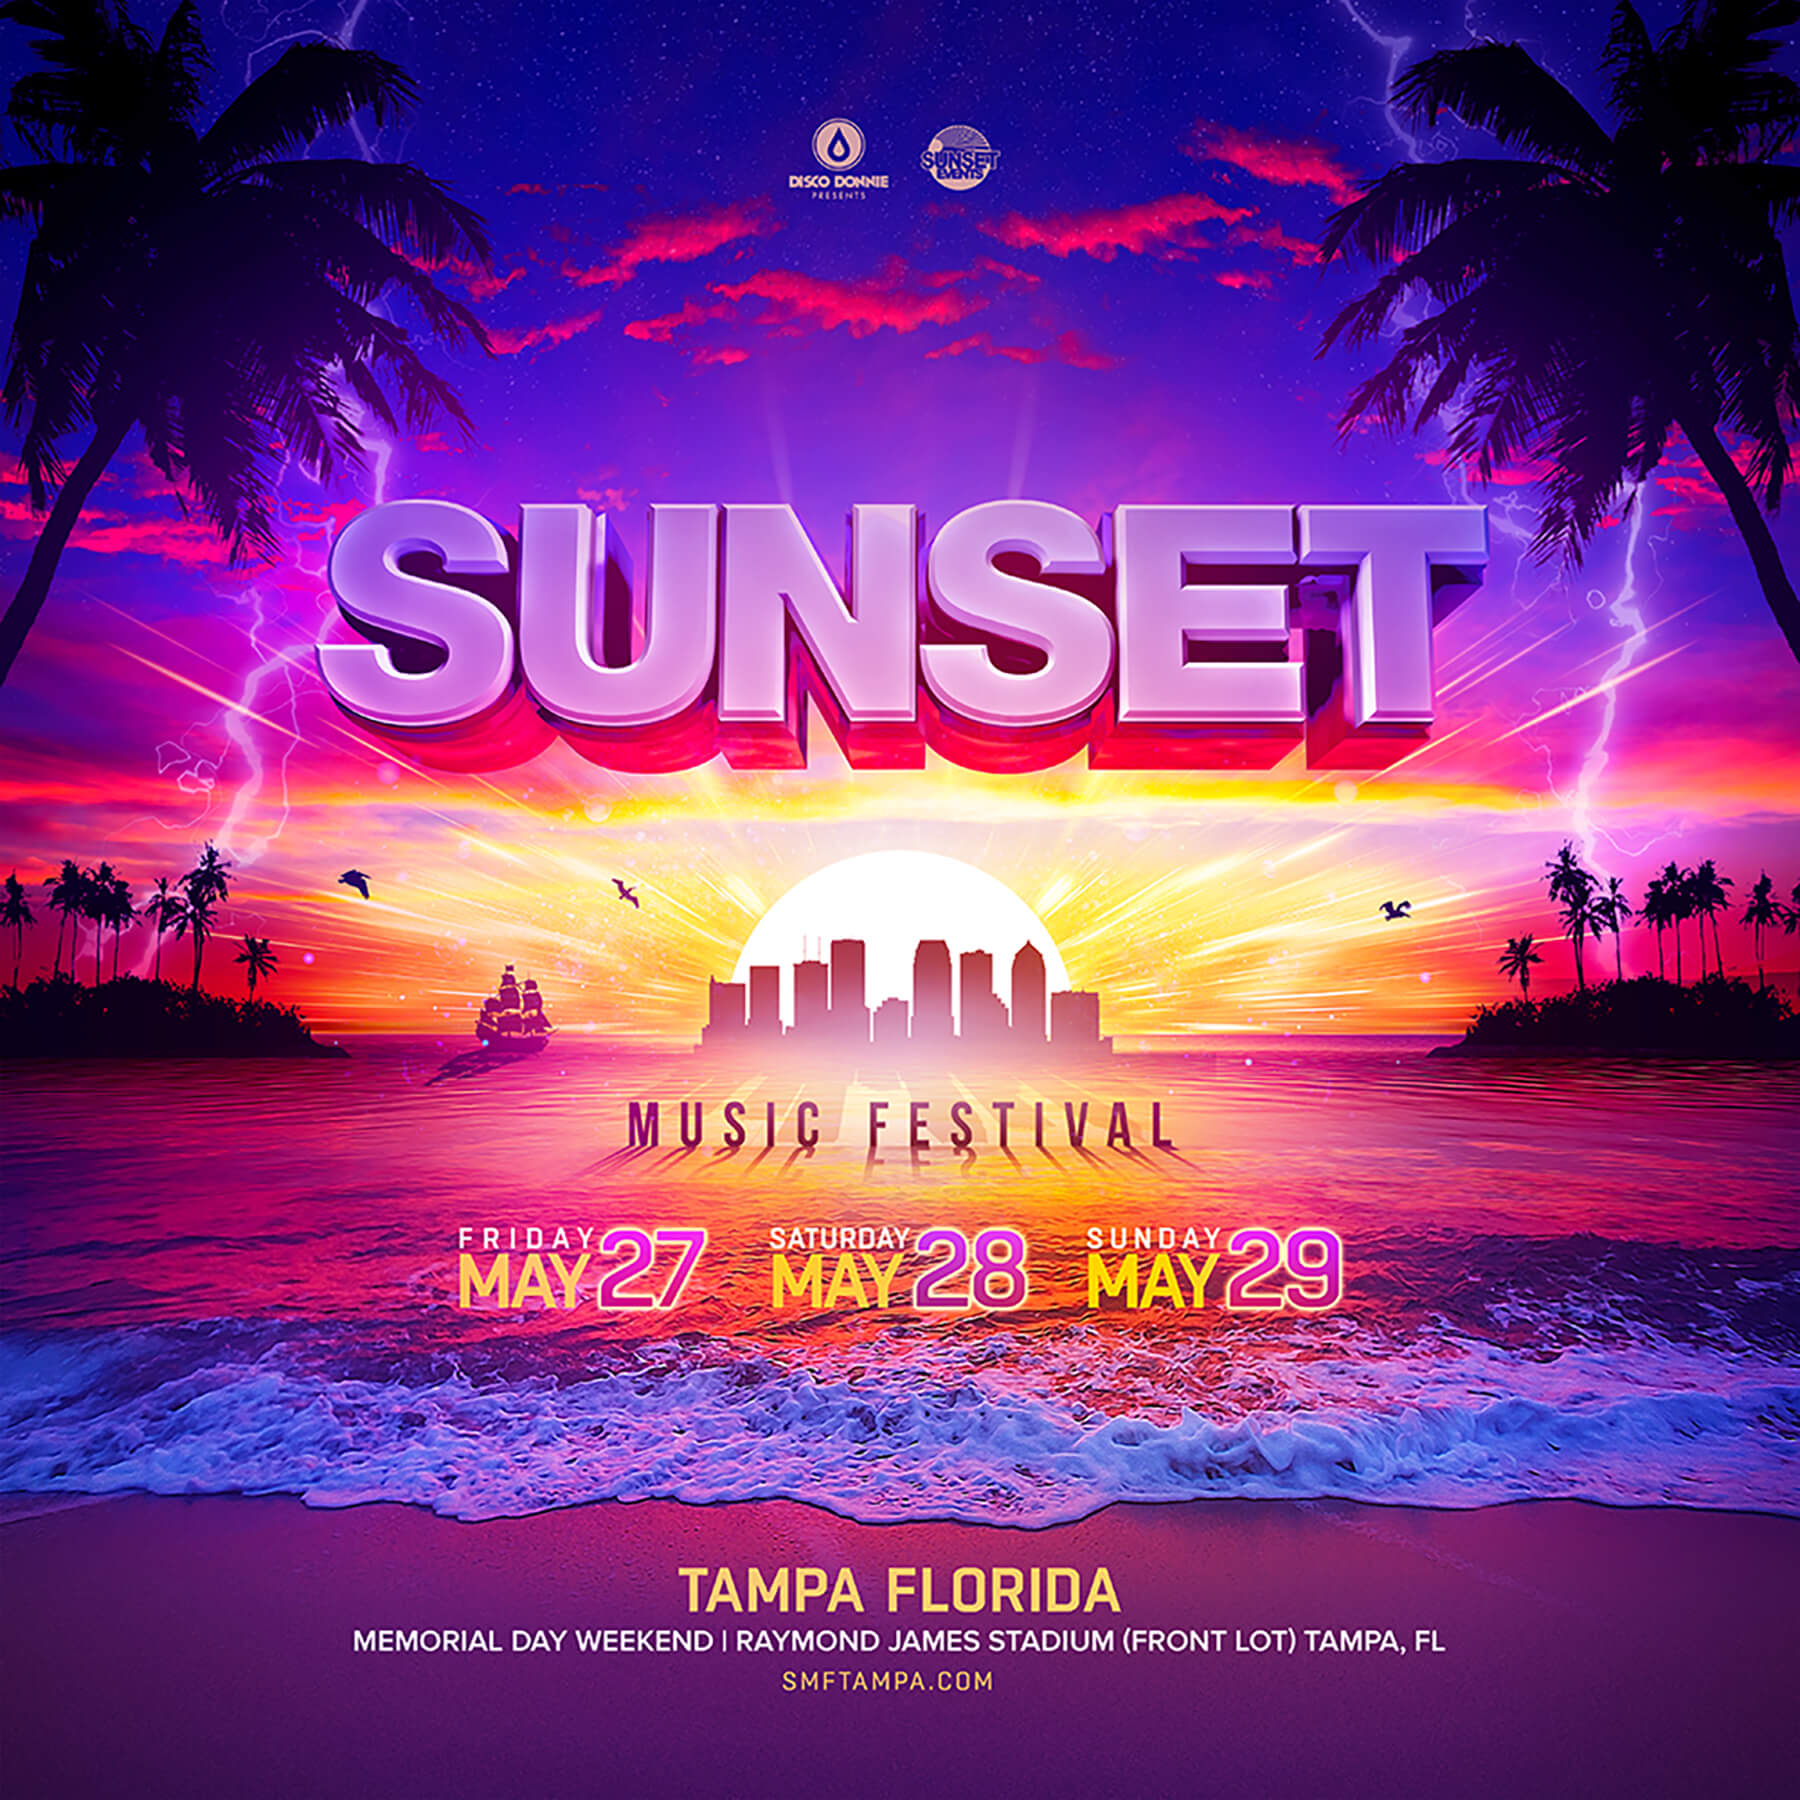 Sunset Music Festival Payment Plan Discount Promo Code,SMF Festival, 2022 Discount Tickets, Tampa Florida, Lineup, GA, May, Saturday, Sunday